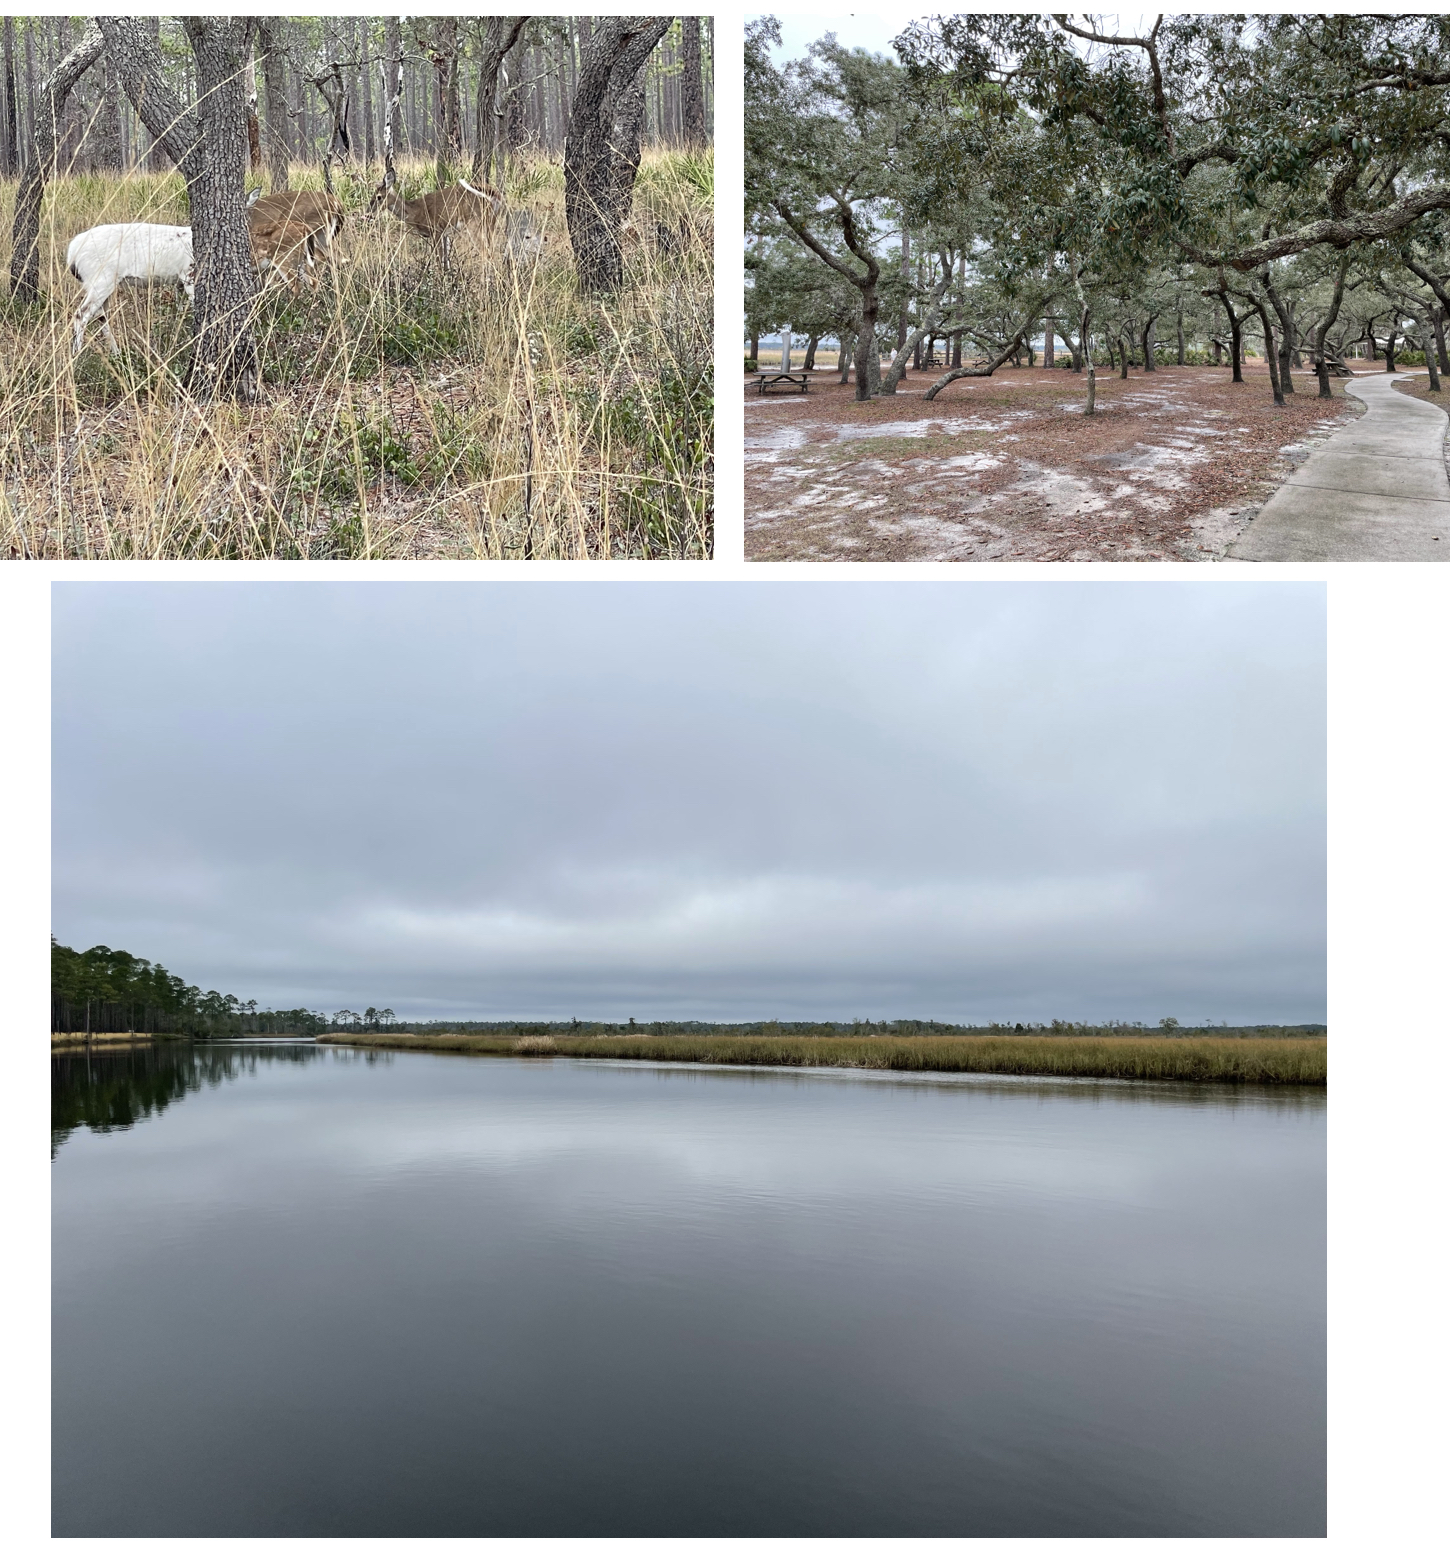 Scenes at the Ochlockonee River state park.  Photos taken by and the property of FourWalls.